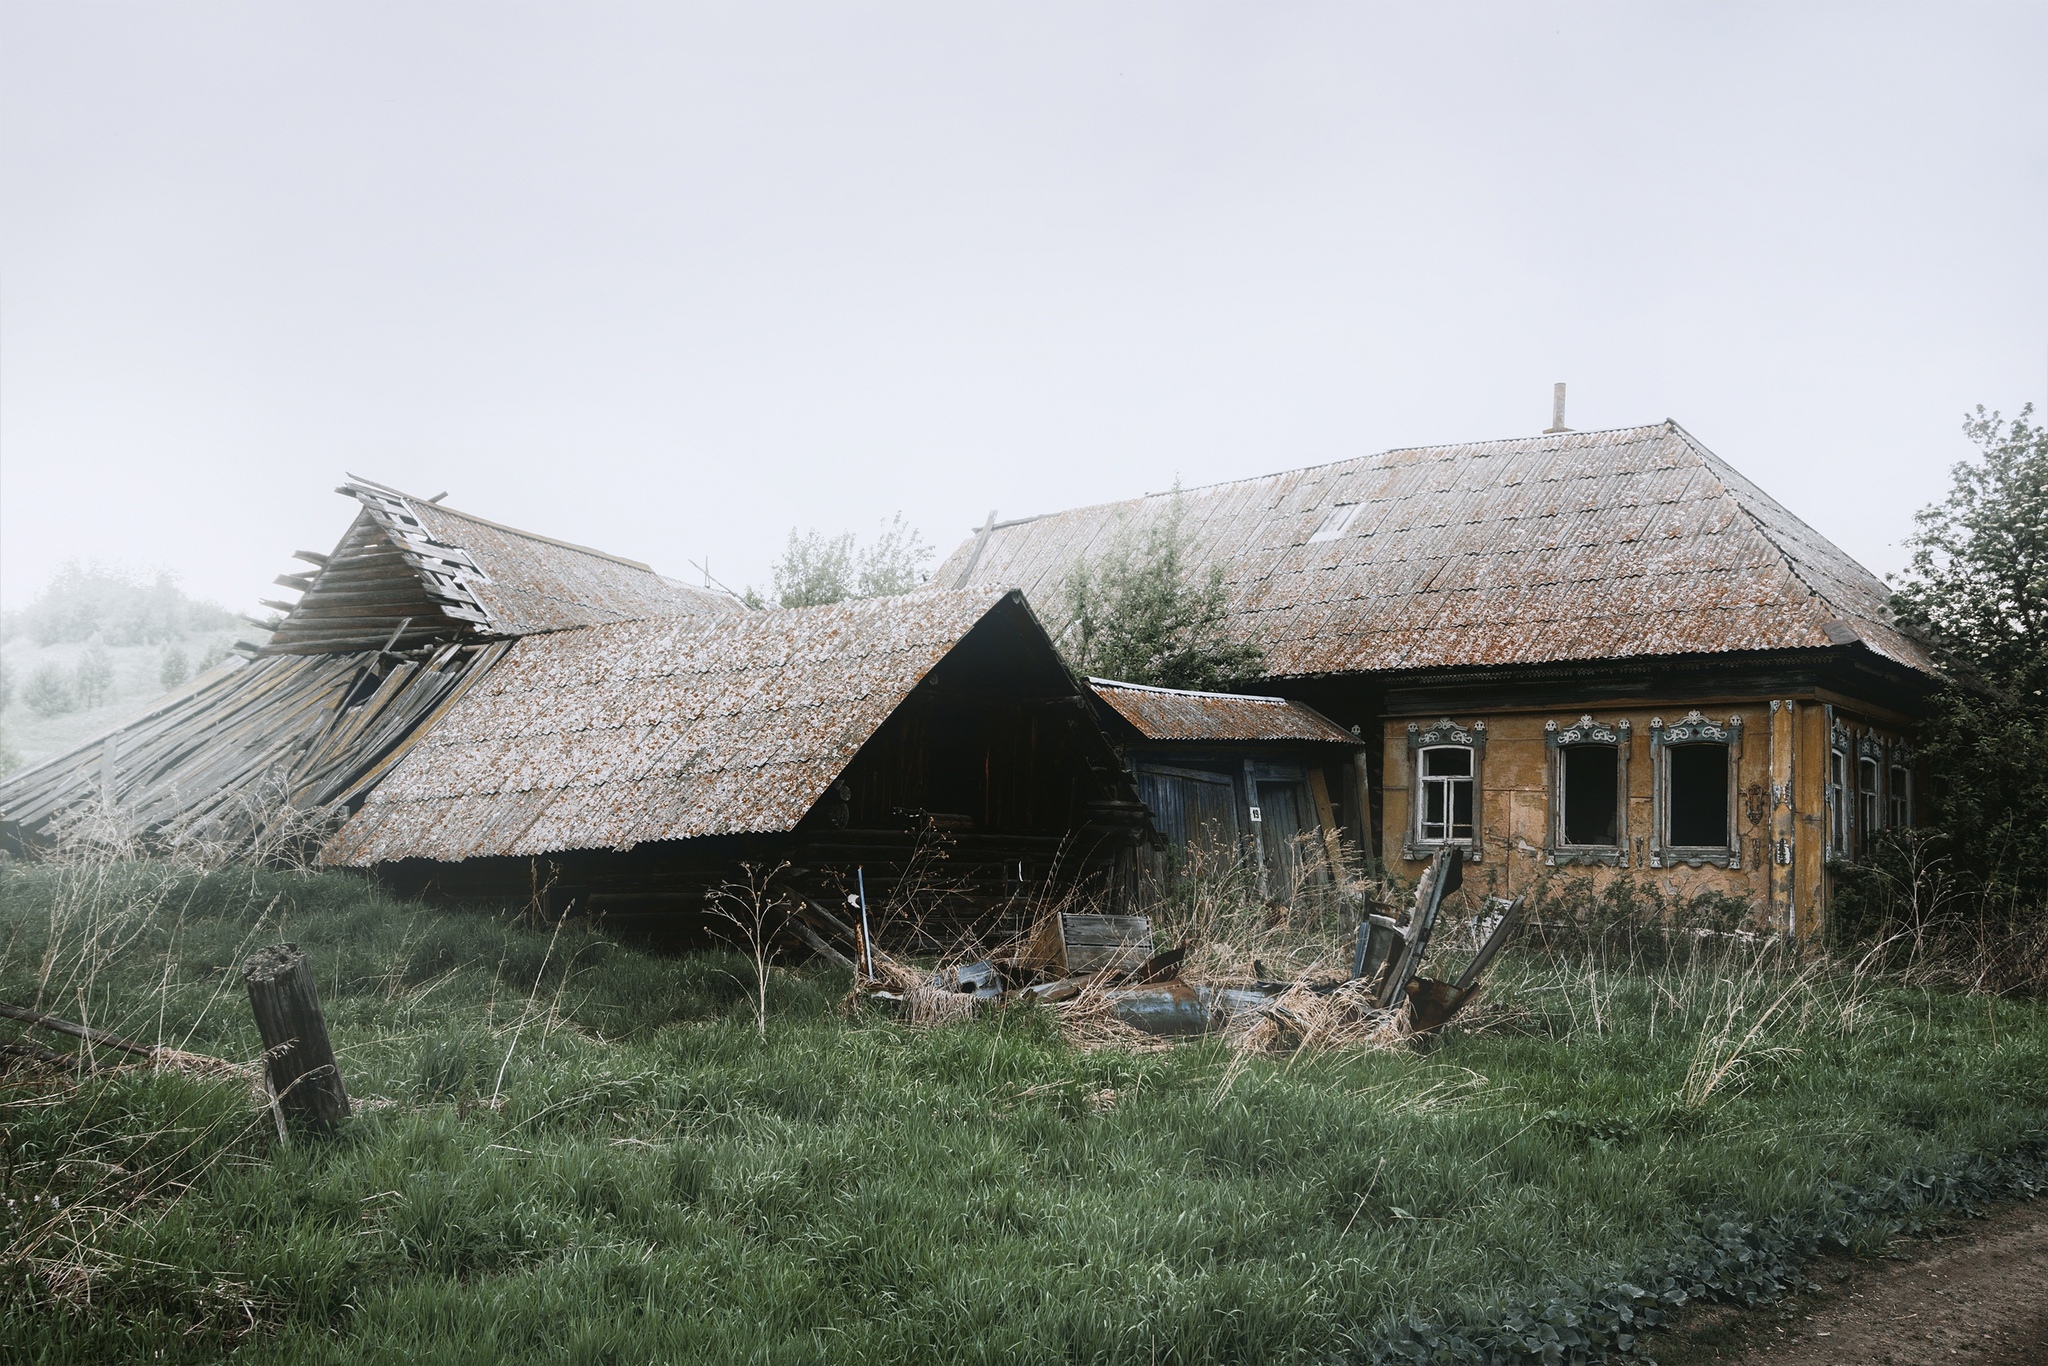 The Russian soul is dying in the outback - Abandoned house, Village, The nature of Russia, Travel across Russia, The photo, Longpost, Time, Past, Abandoned